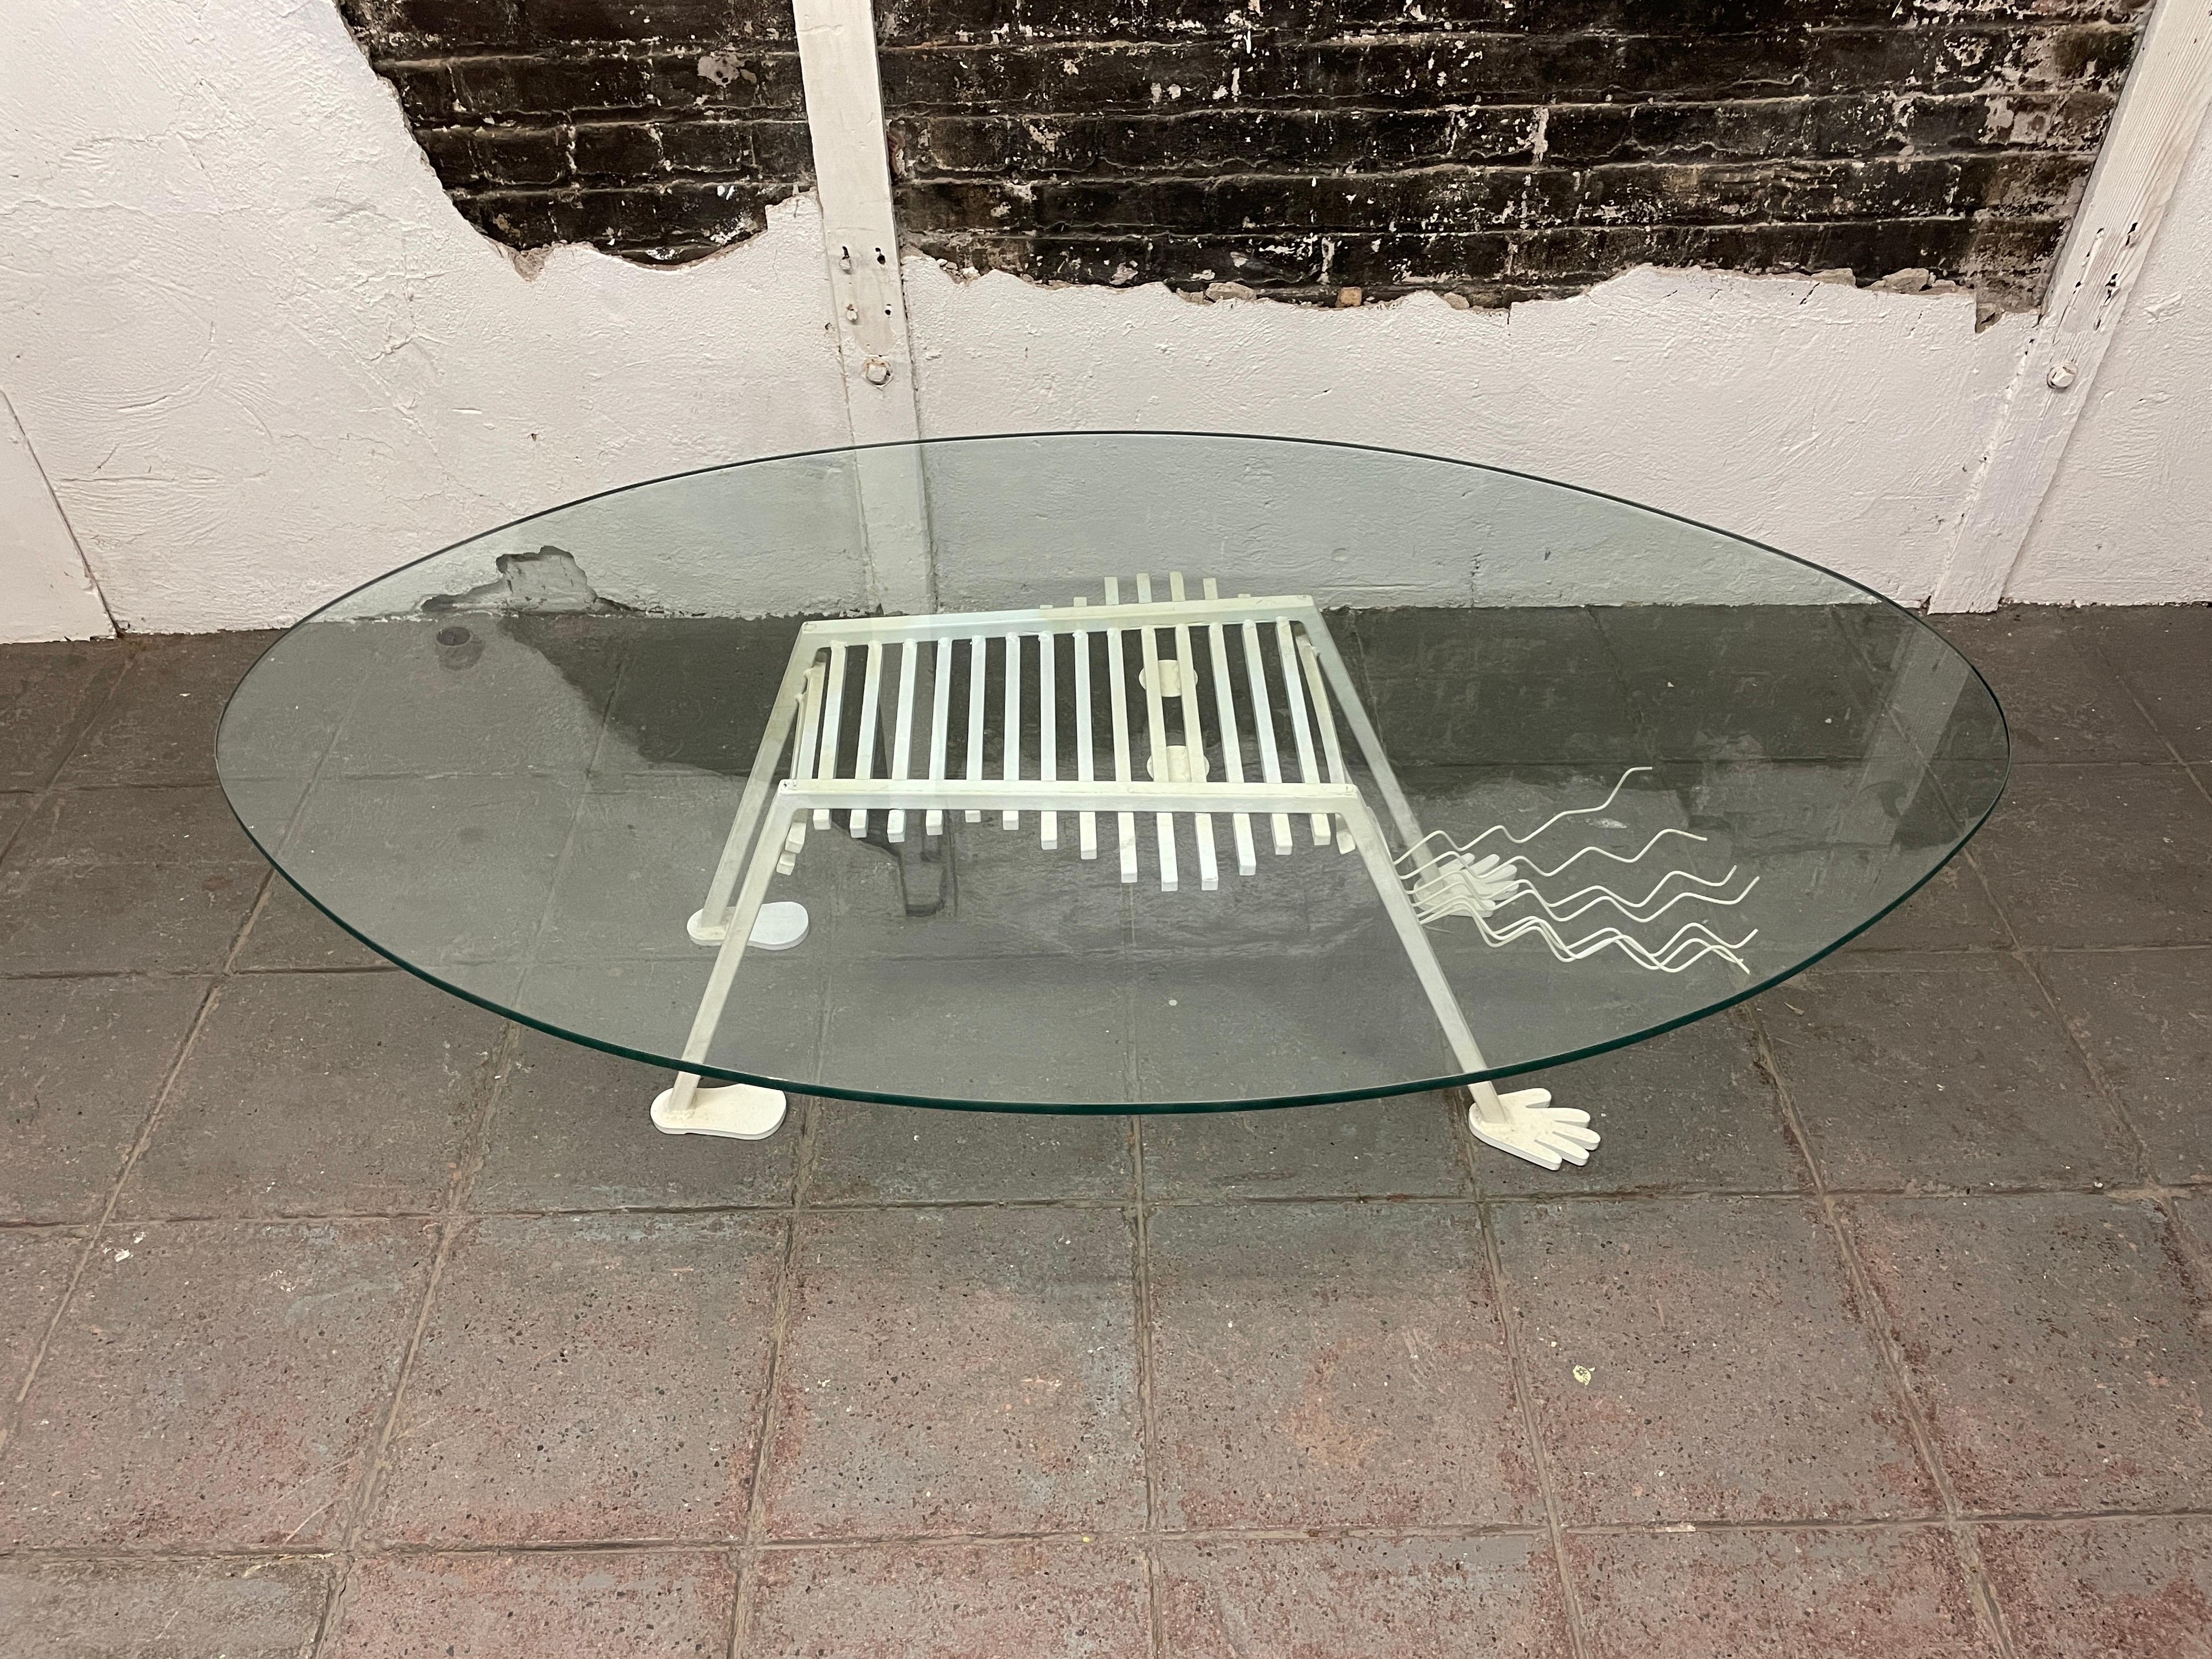 Memphis Milano style 1980s figure glass and metal coffee table. Welded metal female figure with long hair bent over holding up an oval glass top. No label or Mfg. Post-modern circa 1980. Located in Brooklyn NYC.